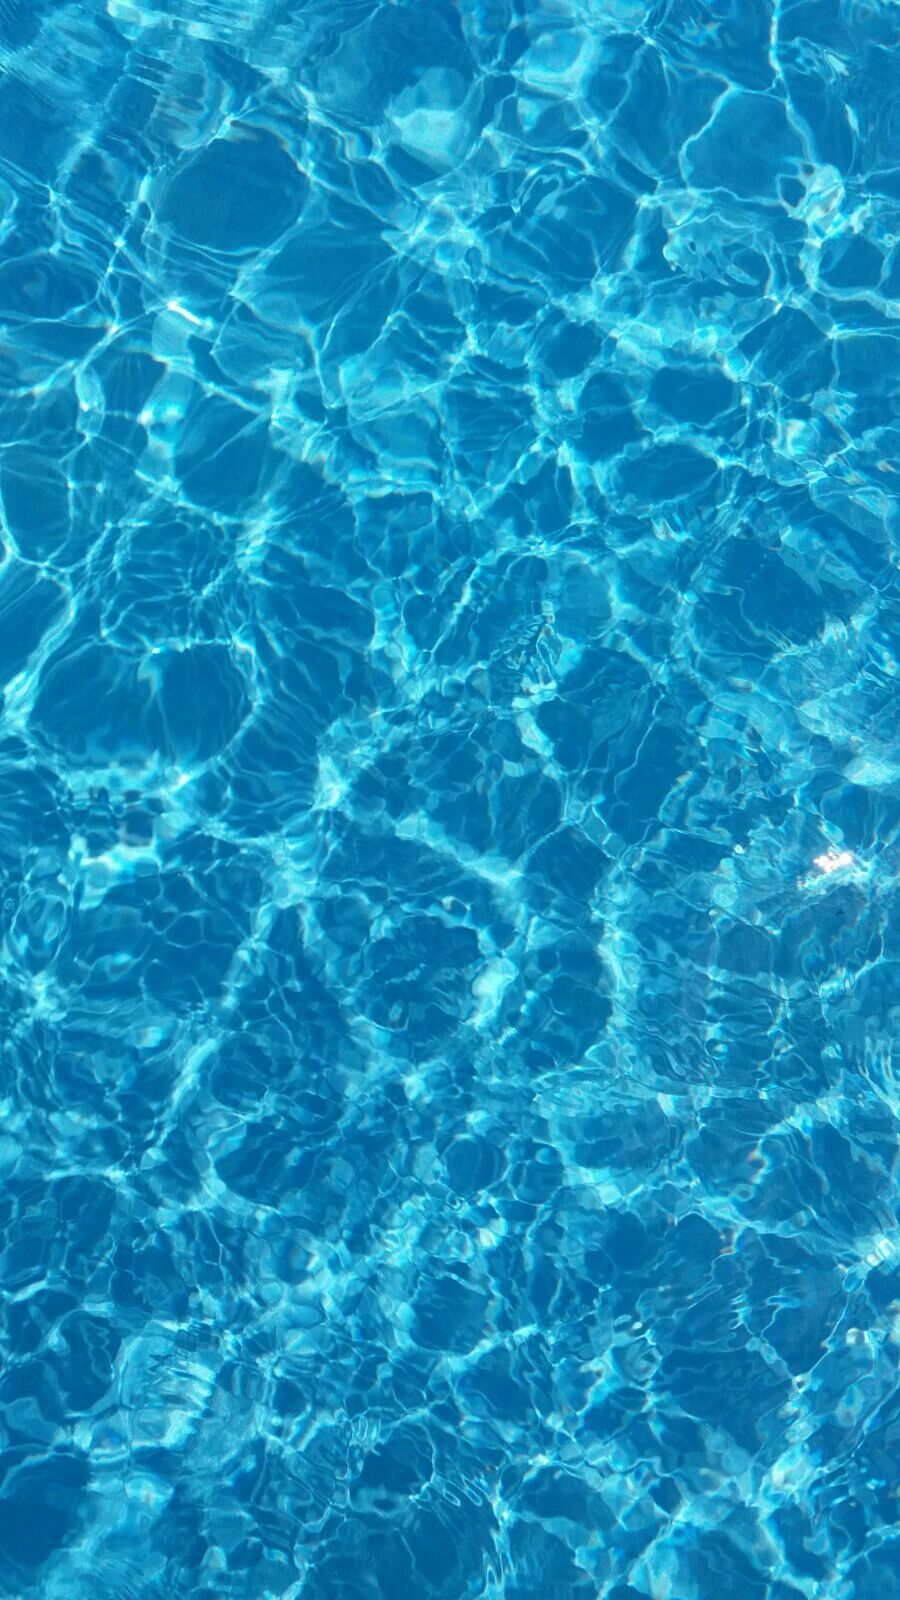 The surface of a pool with blue water - Water